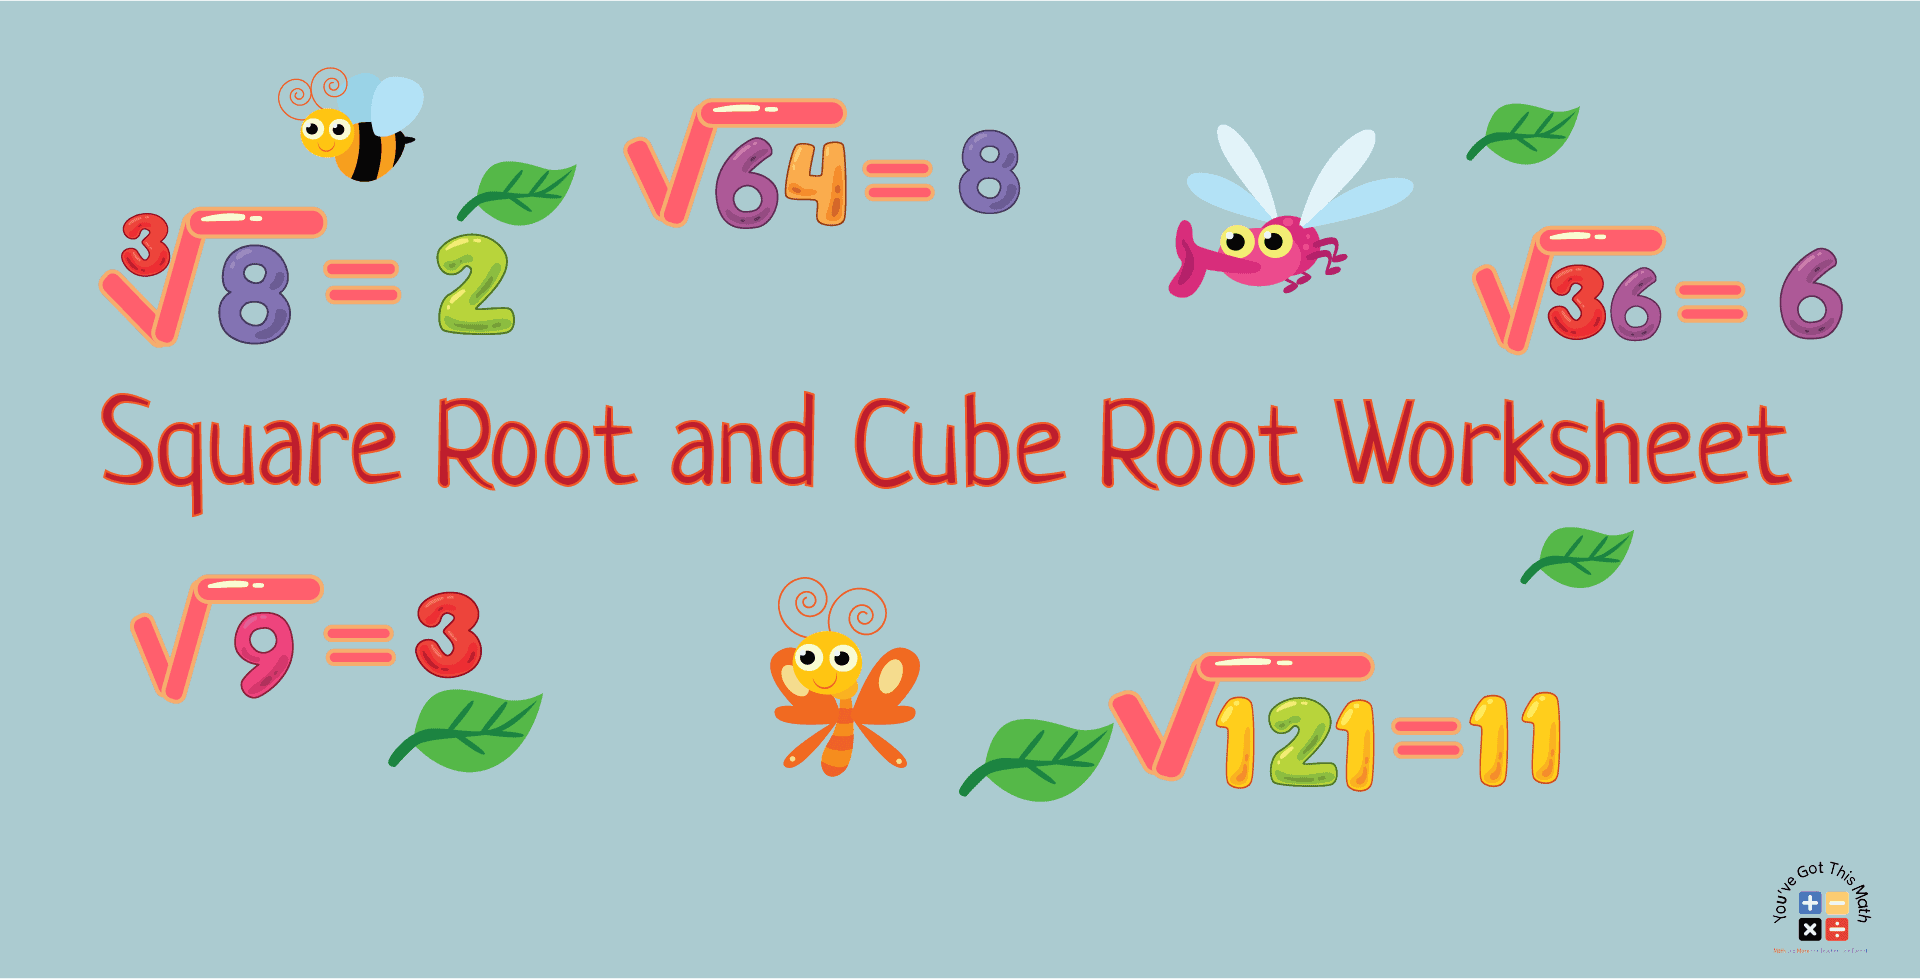 10 Square Root and Cube Root Worksheet | Free Printable